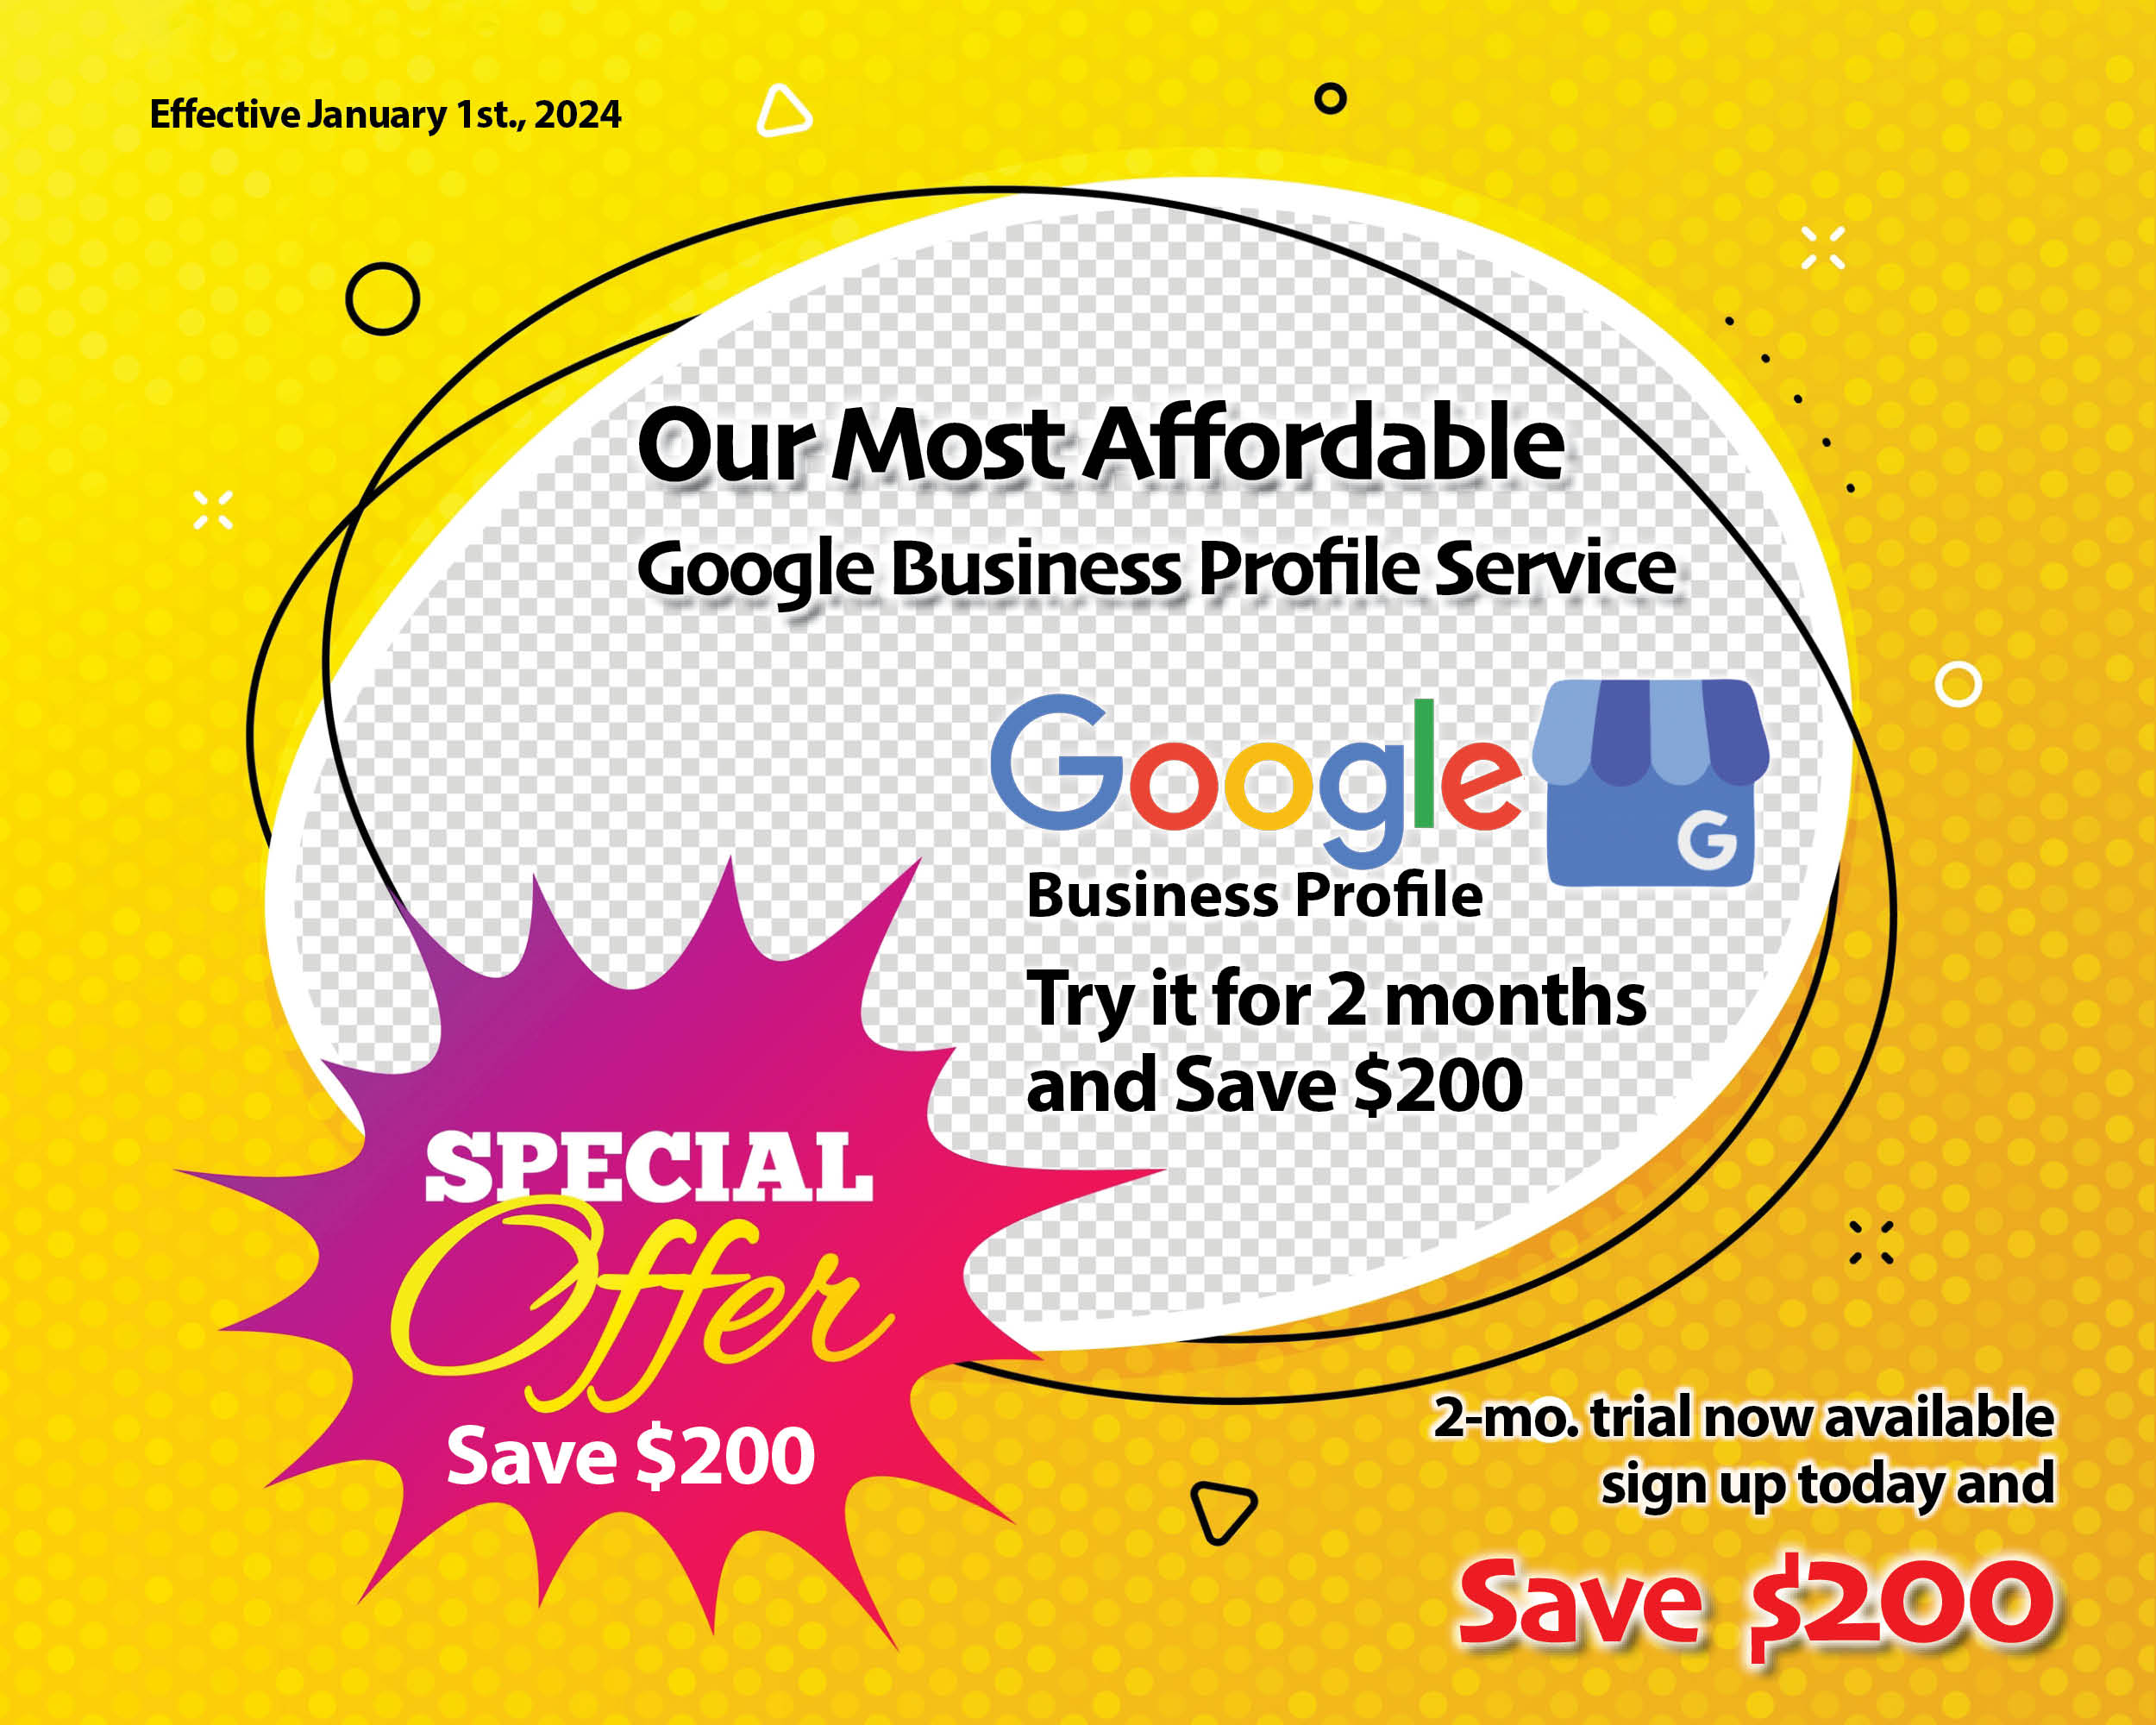 google-business-profile-special-offer-$200-discount-only-2-month-commitment-effective-january-1st-2024